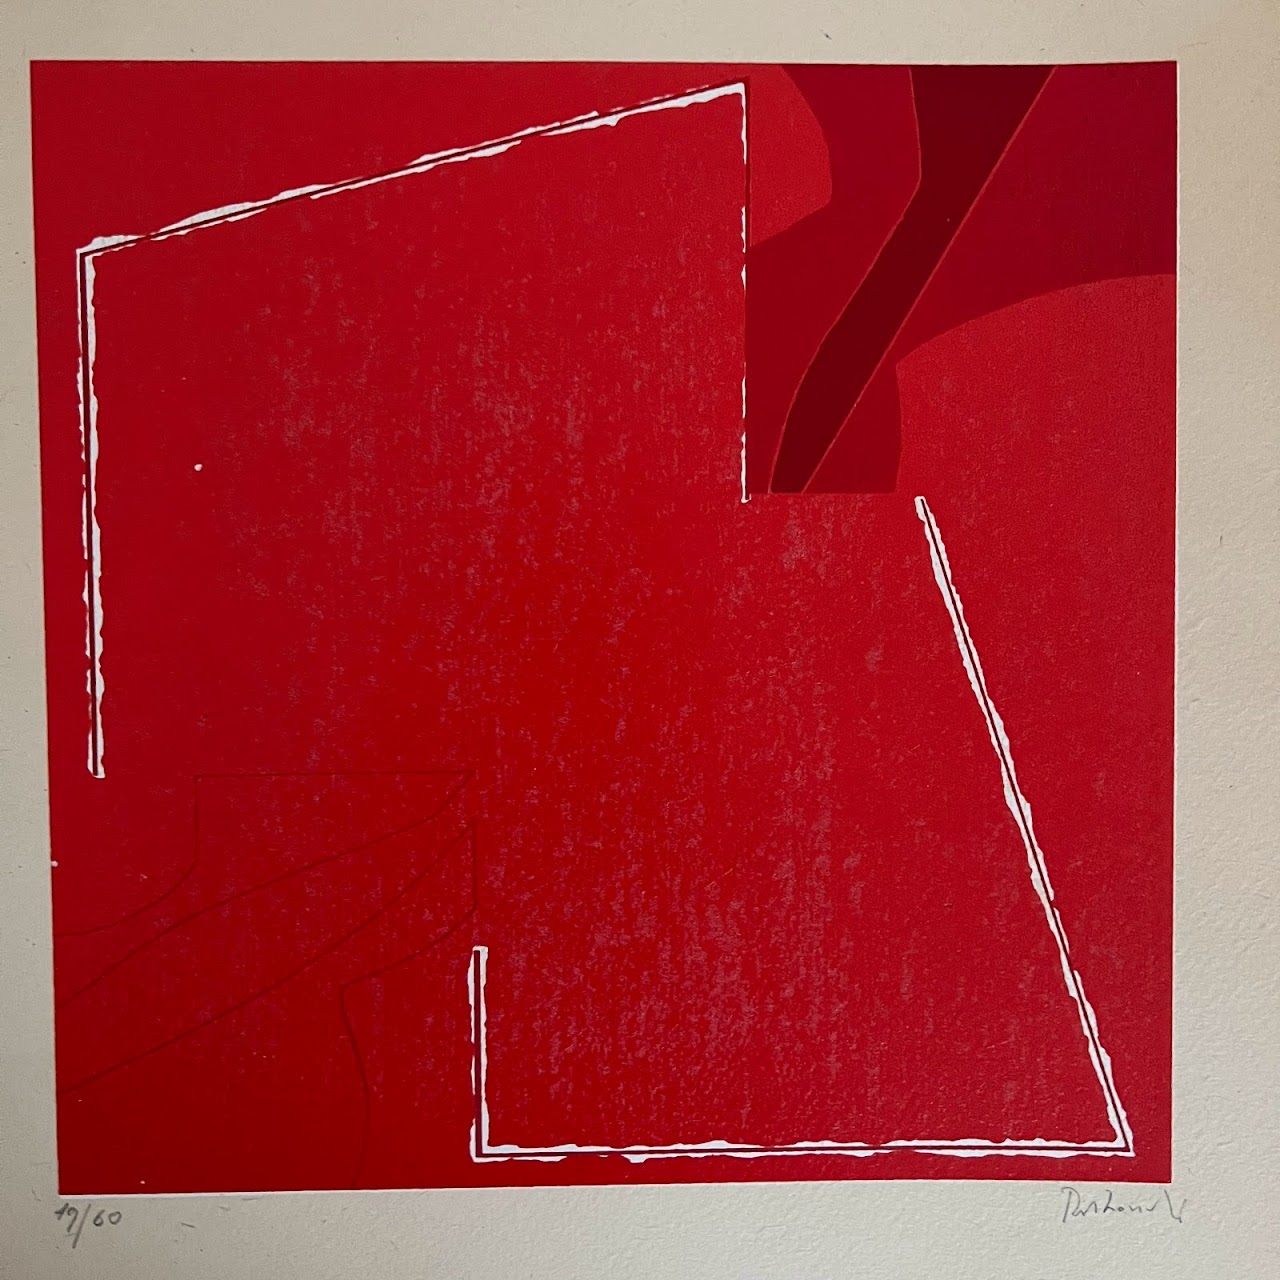 Modern Geometric Abstraction Signed Serigraph Folio, 1976